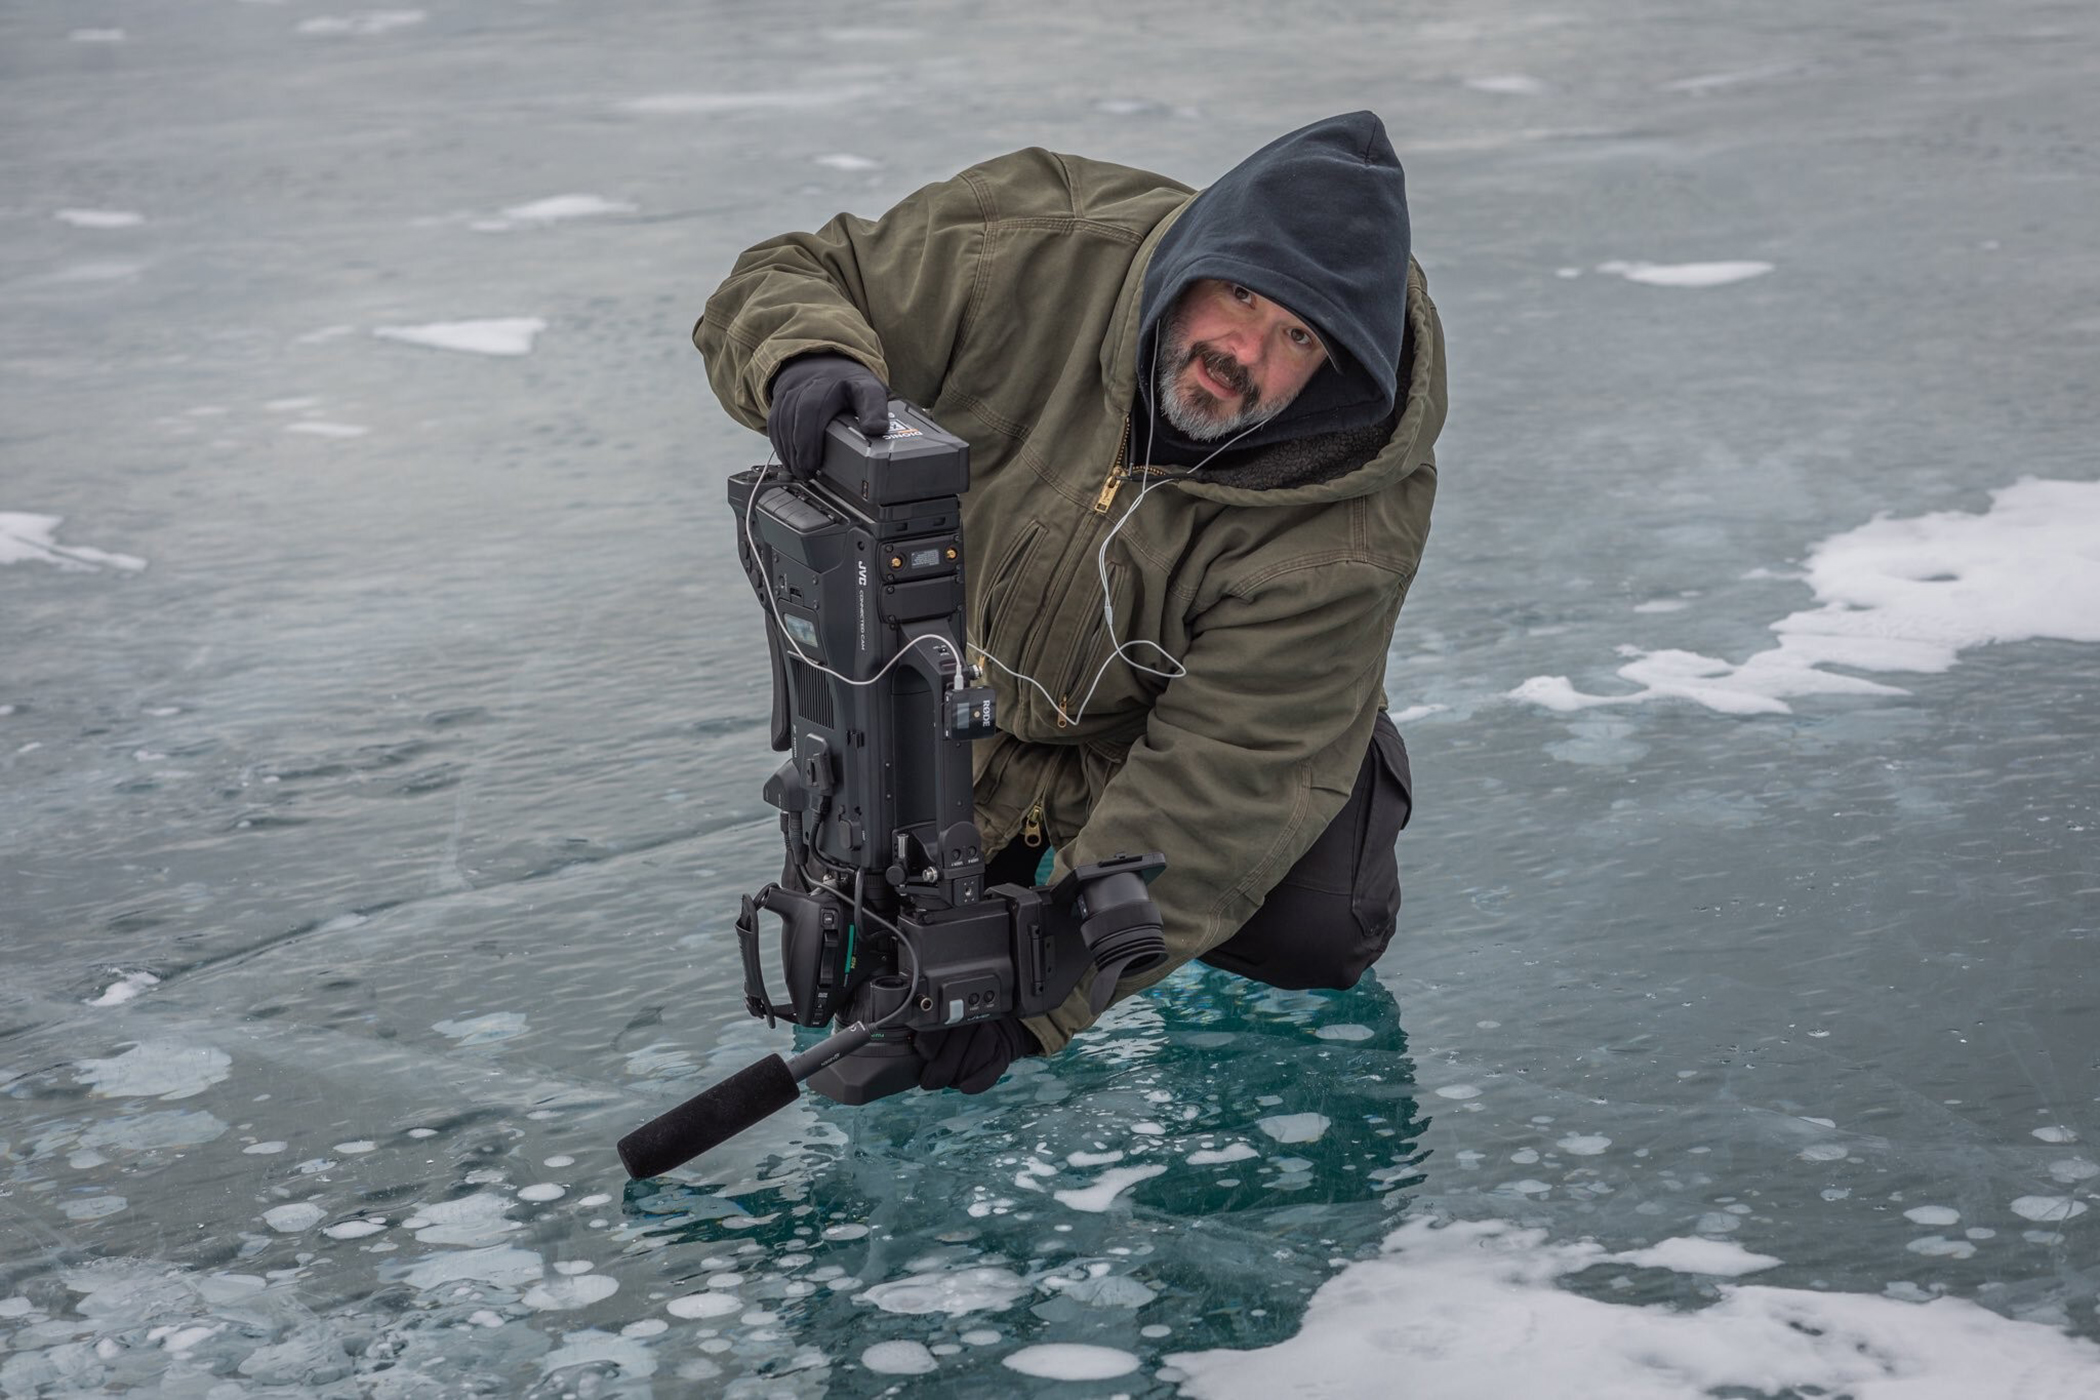 Chris Koehn capturing macro footage of methane bubbles trapped in the ice at Abraham Lake in Alberta, Canada. Credit: Keith Moore Photography.